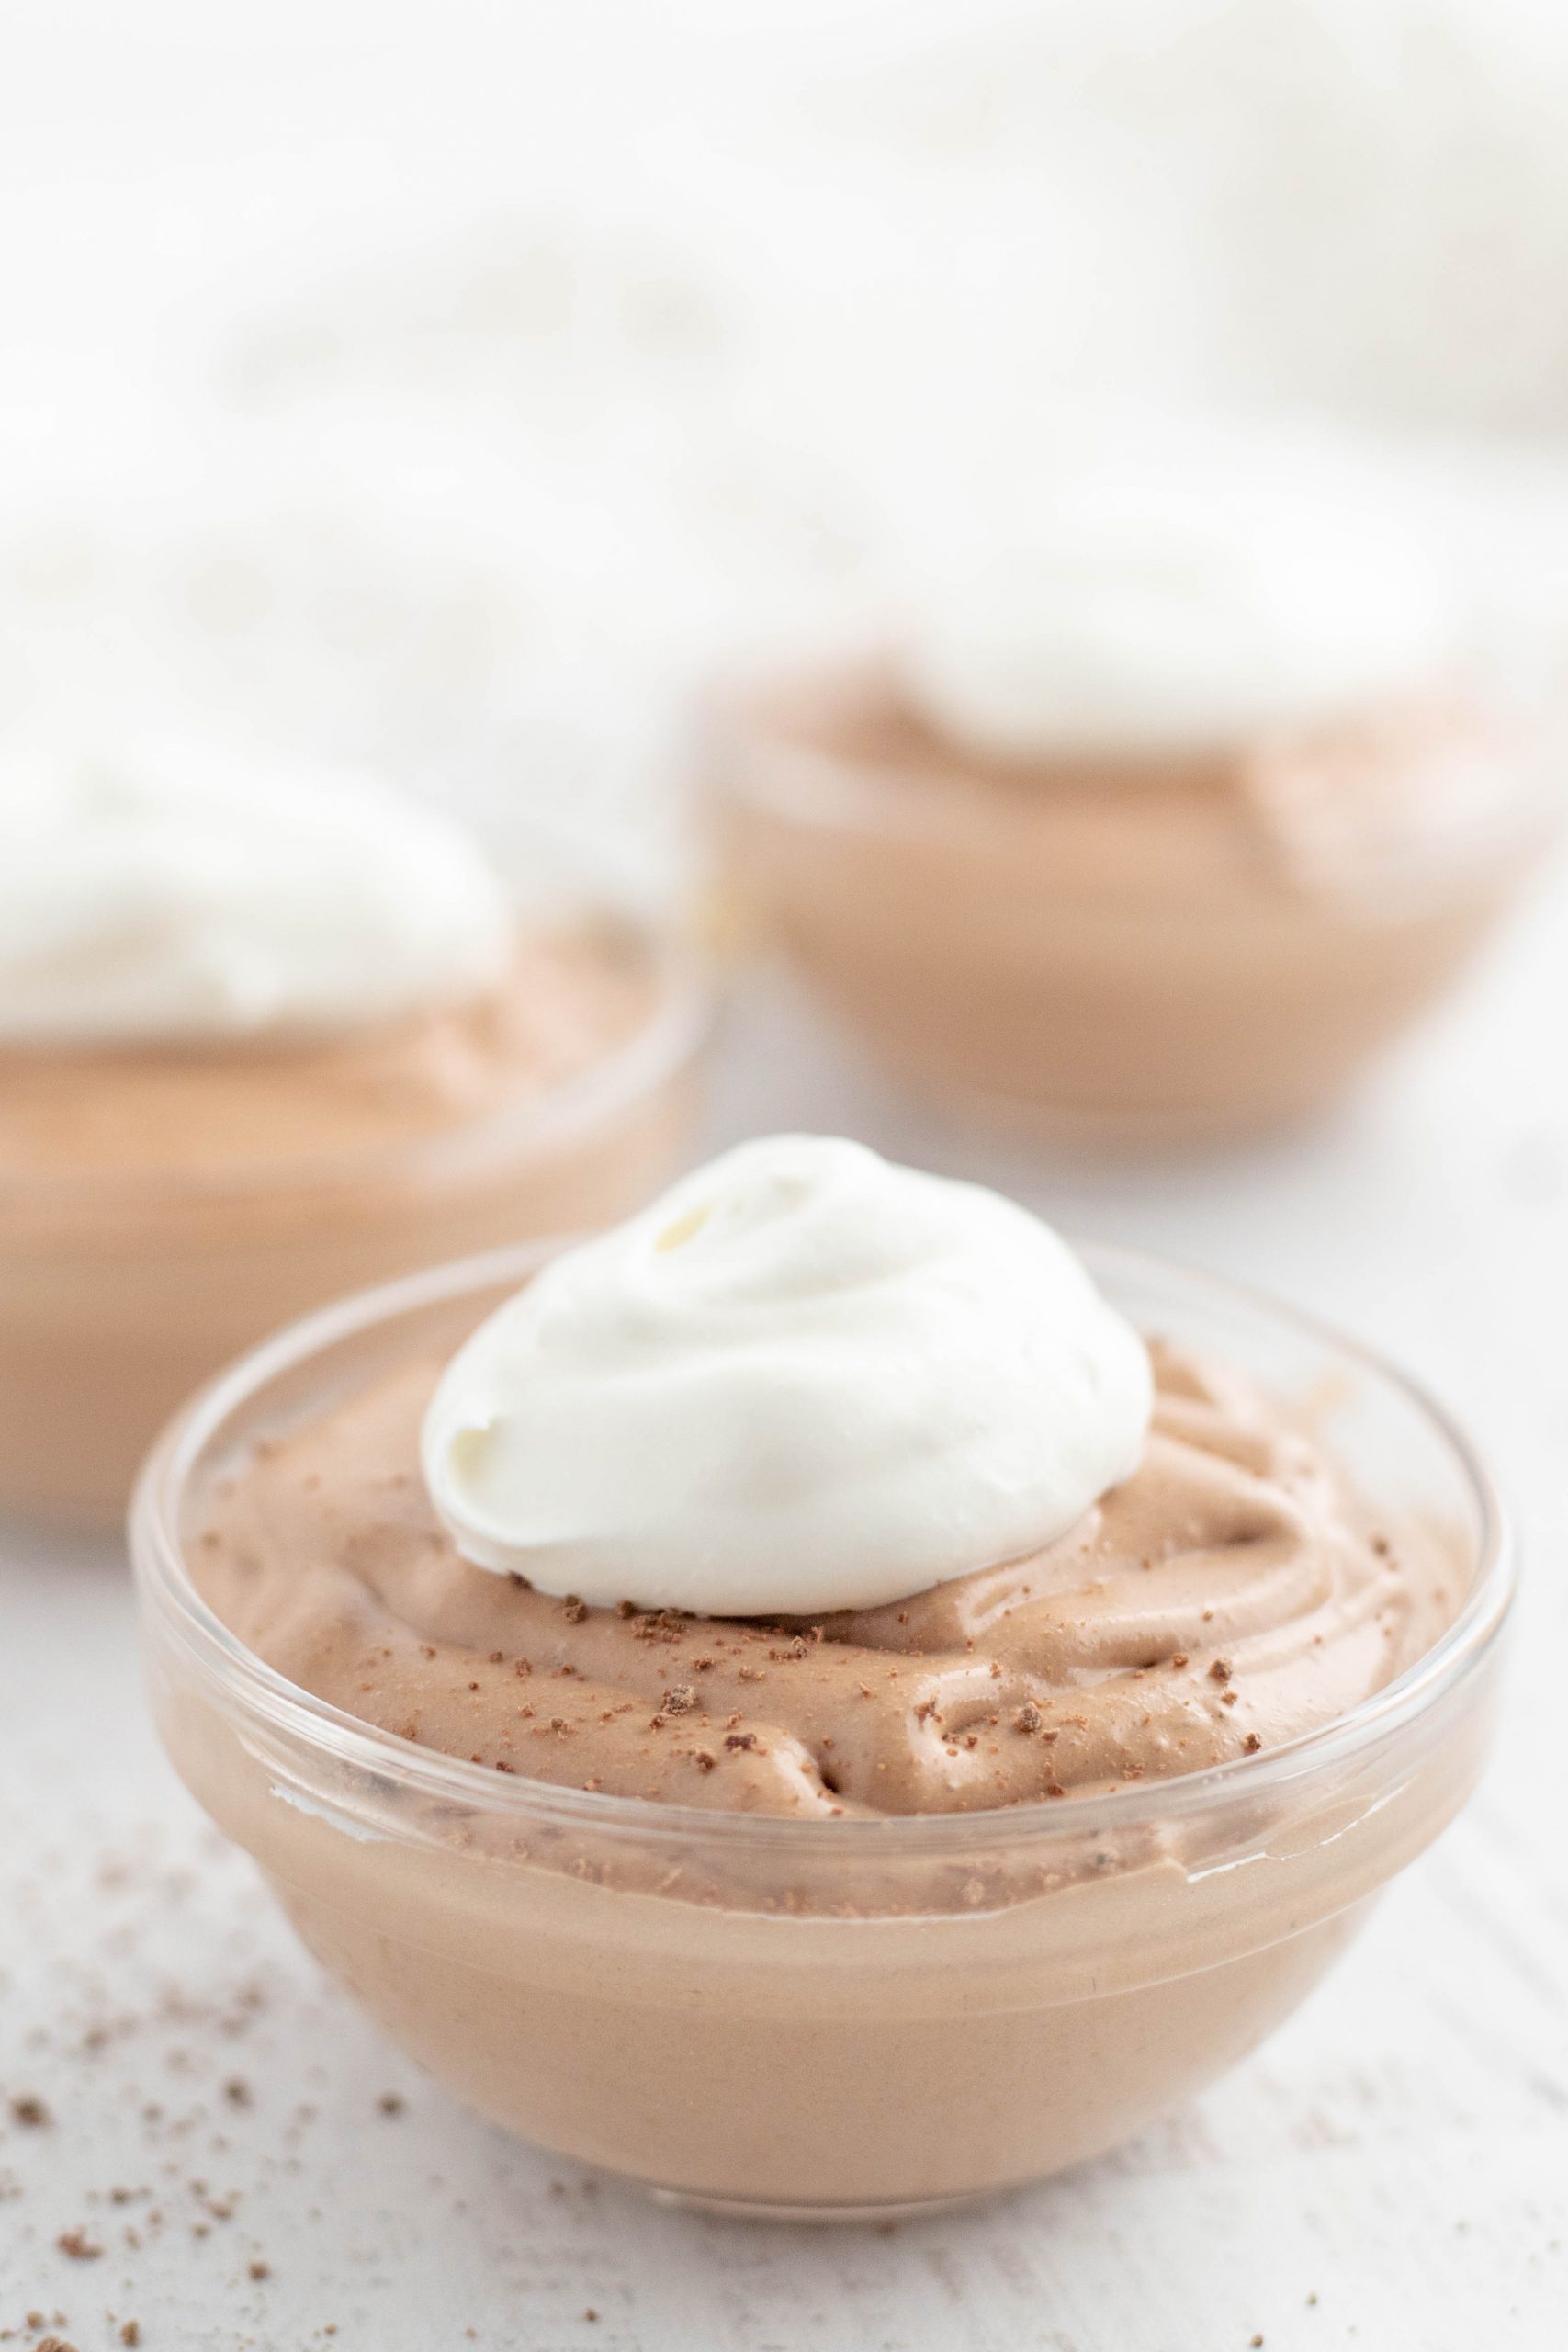 Creamy chocolate deliciousness topped with whipped topping in a dessert cup